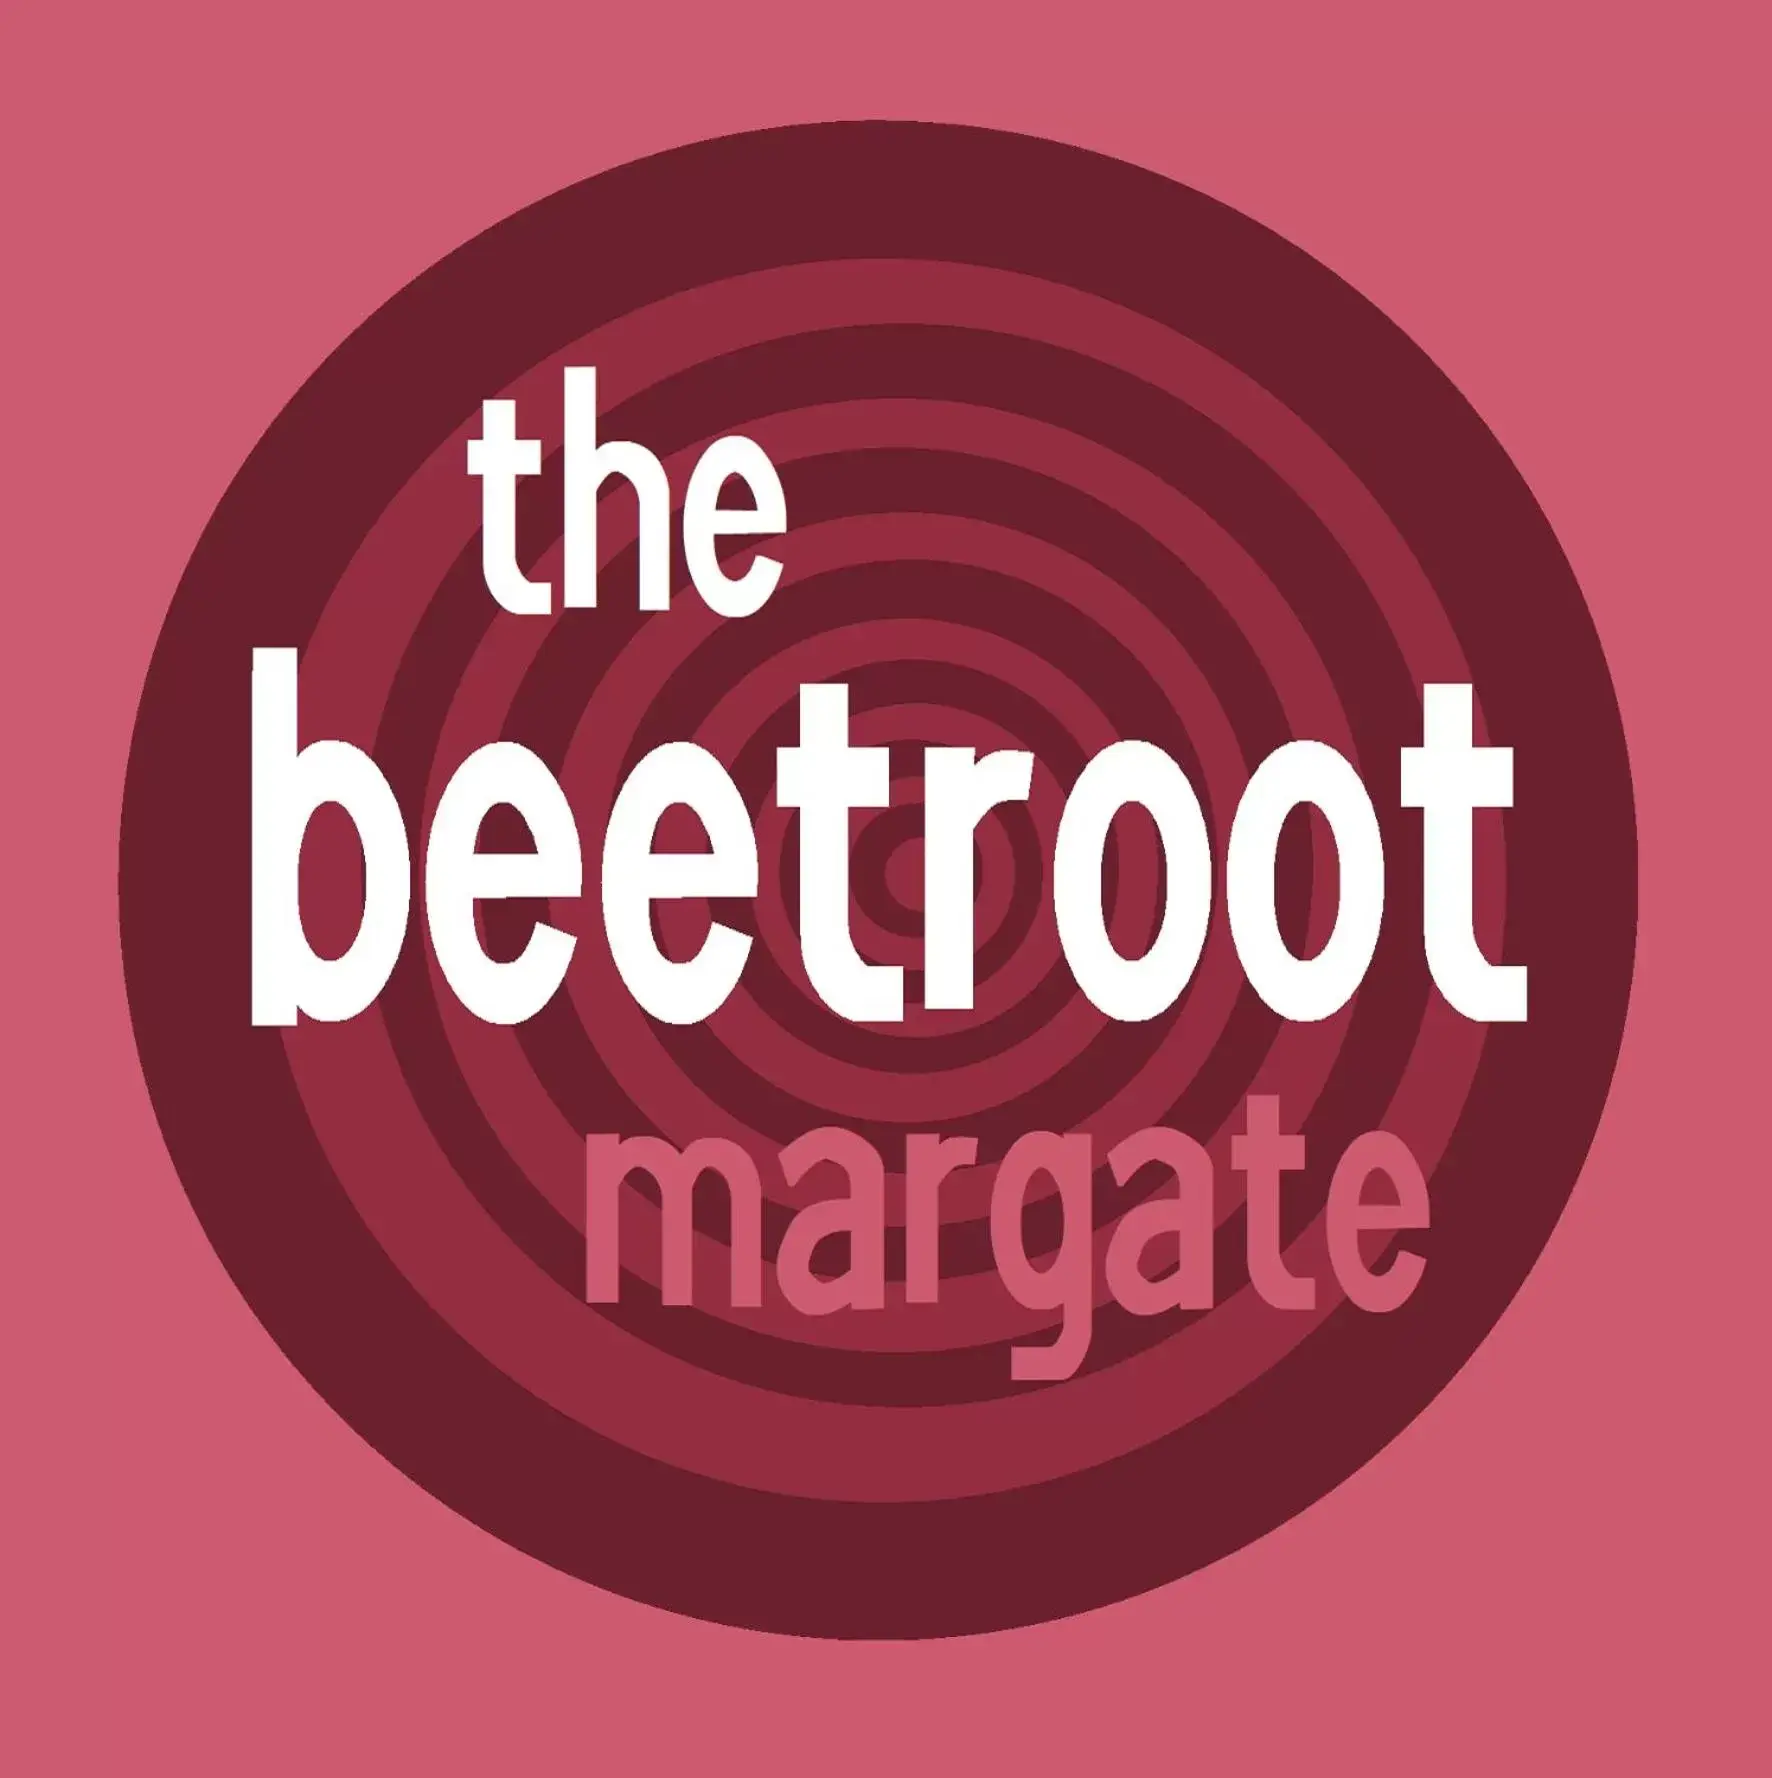 The Beetroot